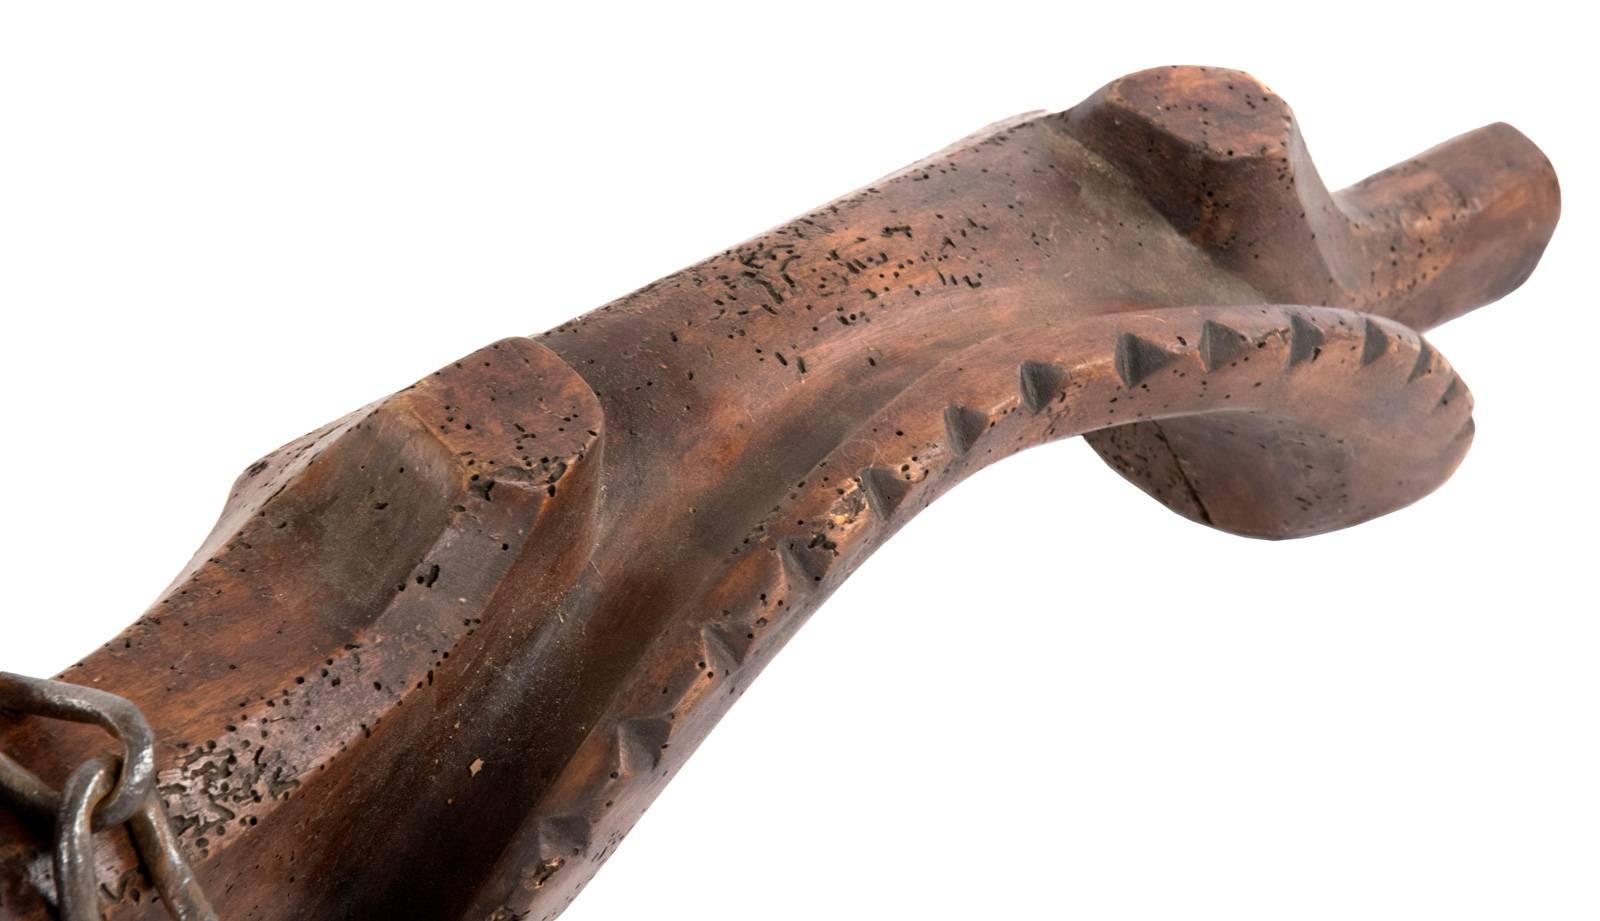 A 19th century French handmade walnut double cattle yoke shaped from a single piece of wood that was carved and fitted with iron and brass hardware.